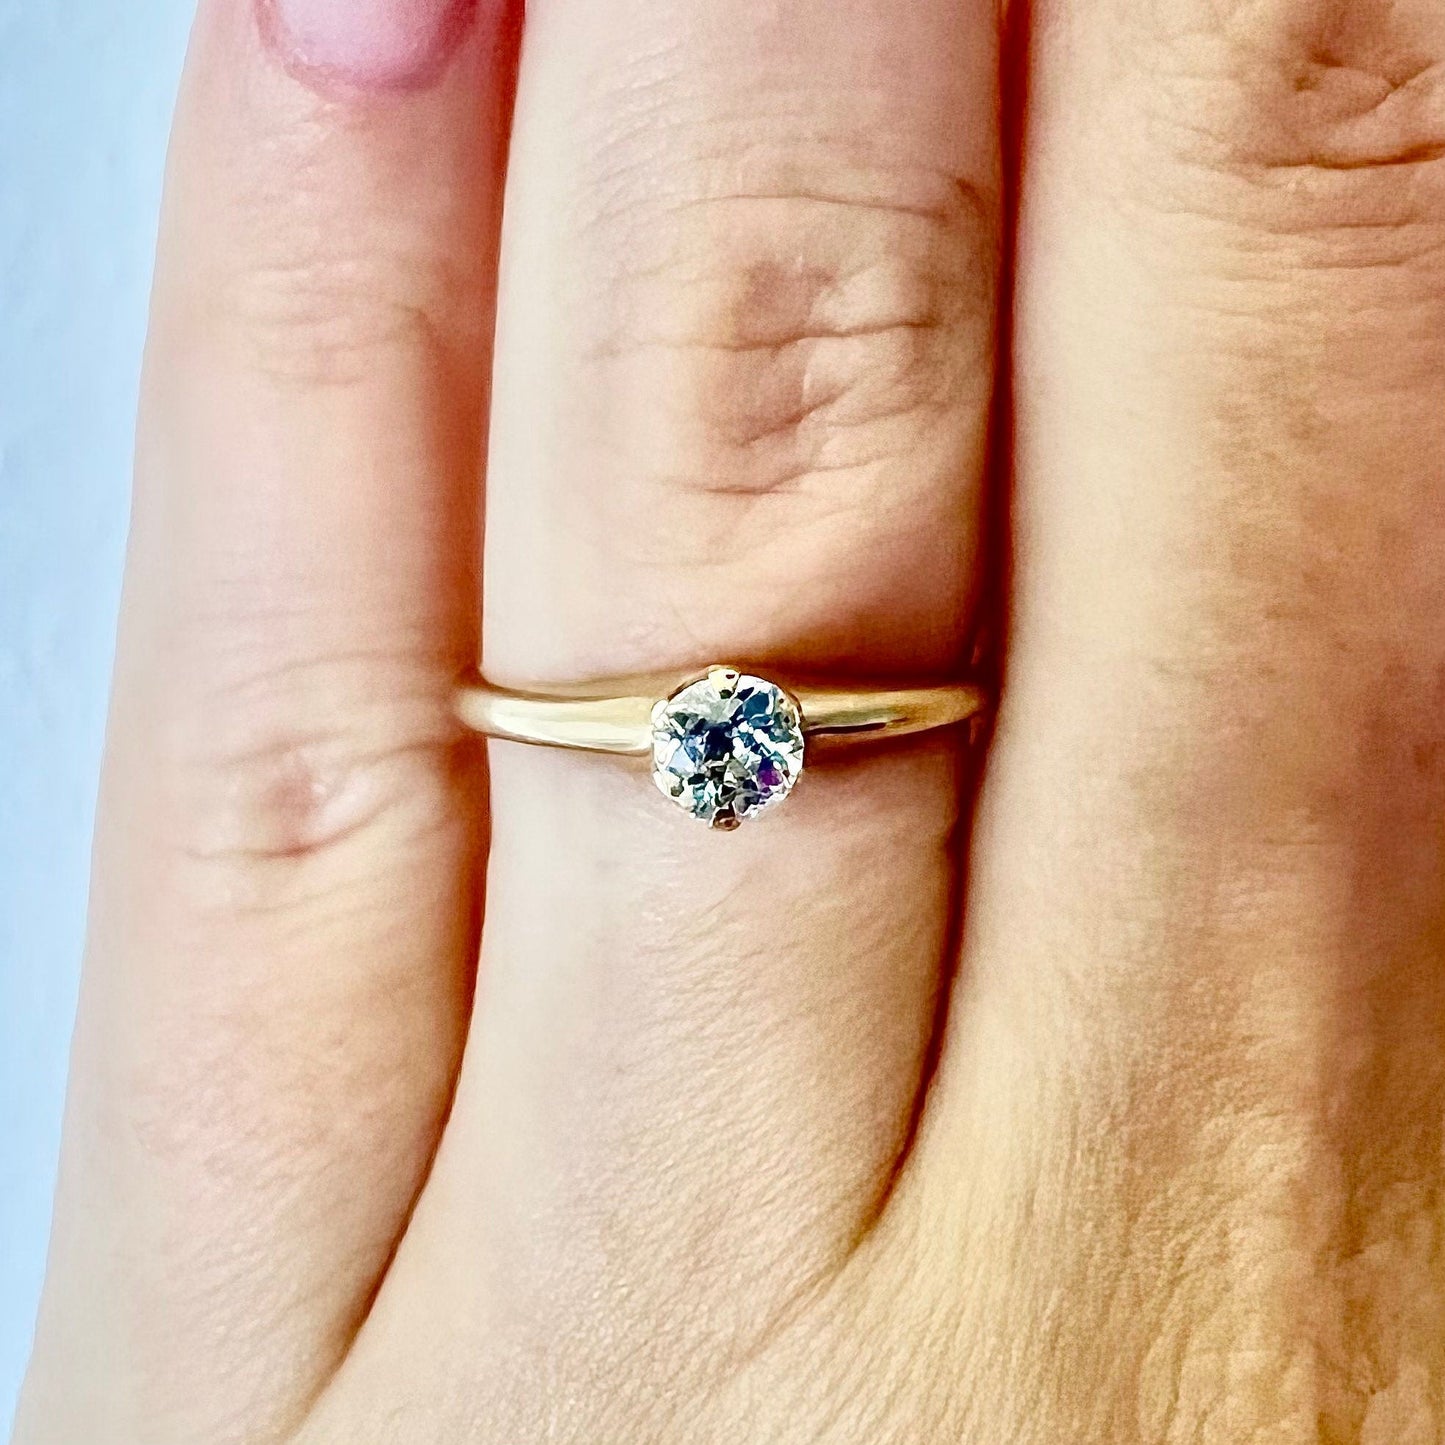 14K Antique Edwardian Diamond Solitaire Engagement Ring - Circa 1900 - Vintage Yellow Gold Solitaire - Wedding Ring - Birthday Gift For her